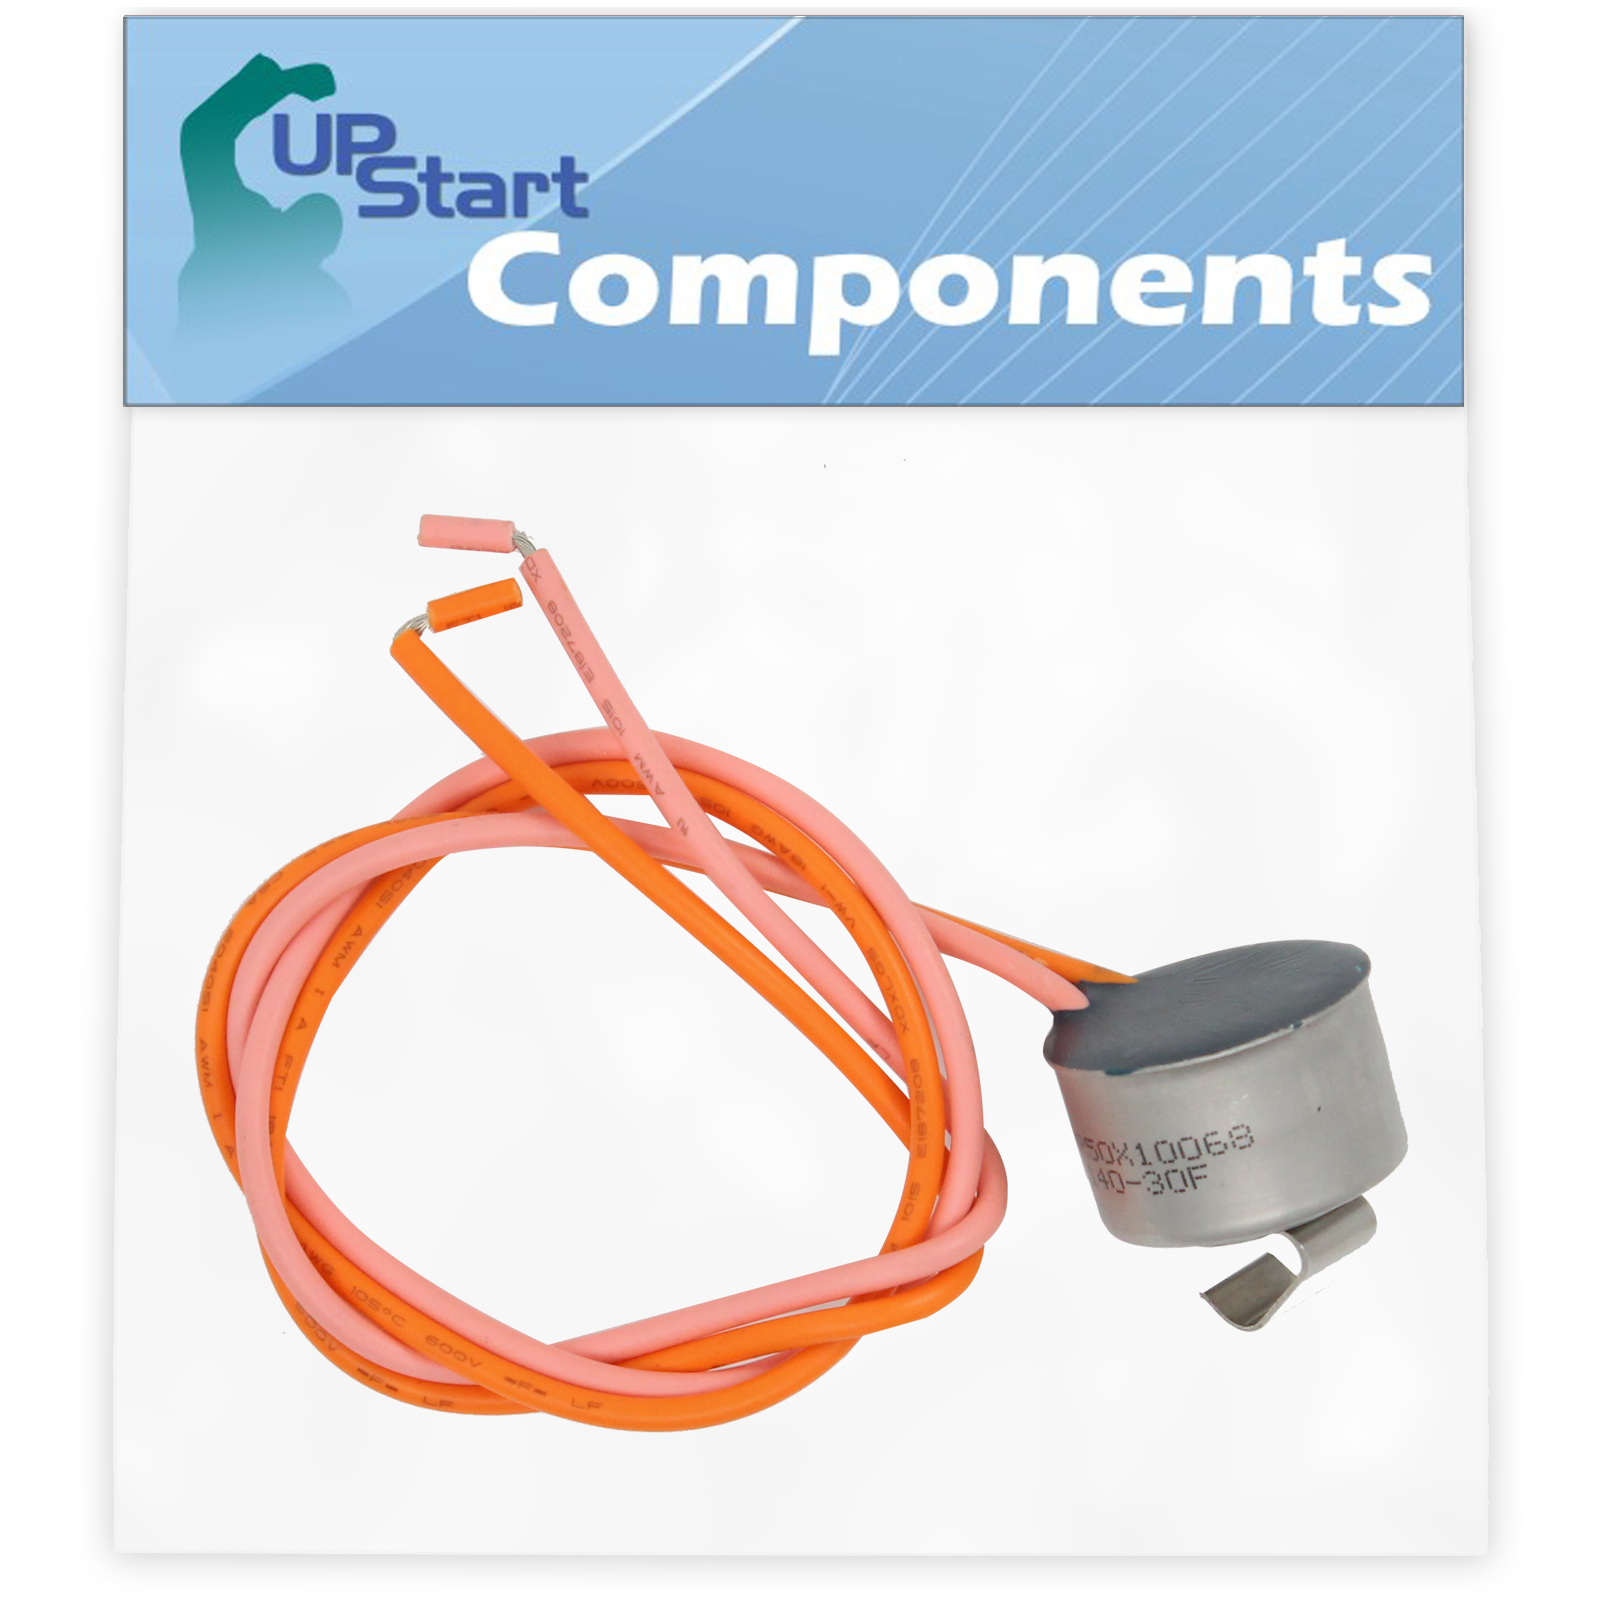 WR50X10068 Defrost Thermostat Replacement for General Electric HSK27MGMACCC Refrigerator - Compatible with WR50X10068 Defrost Limiter Thermostat - UpStart Components Brand - image 1 of 2